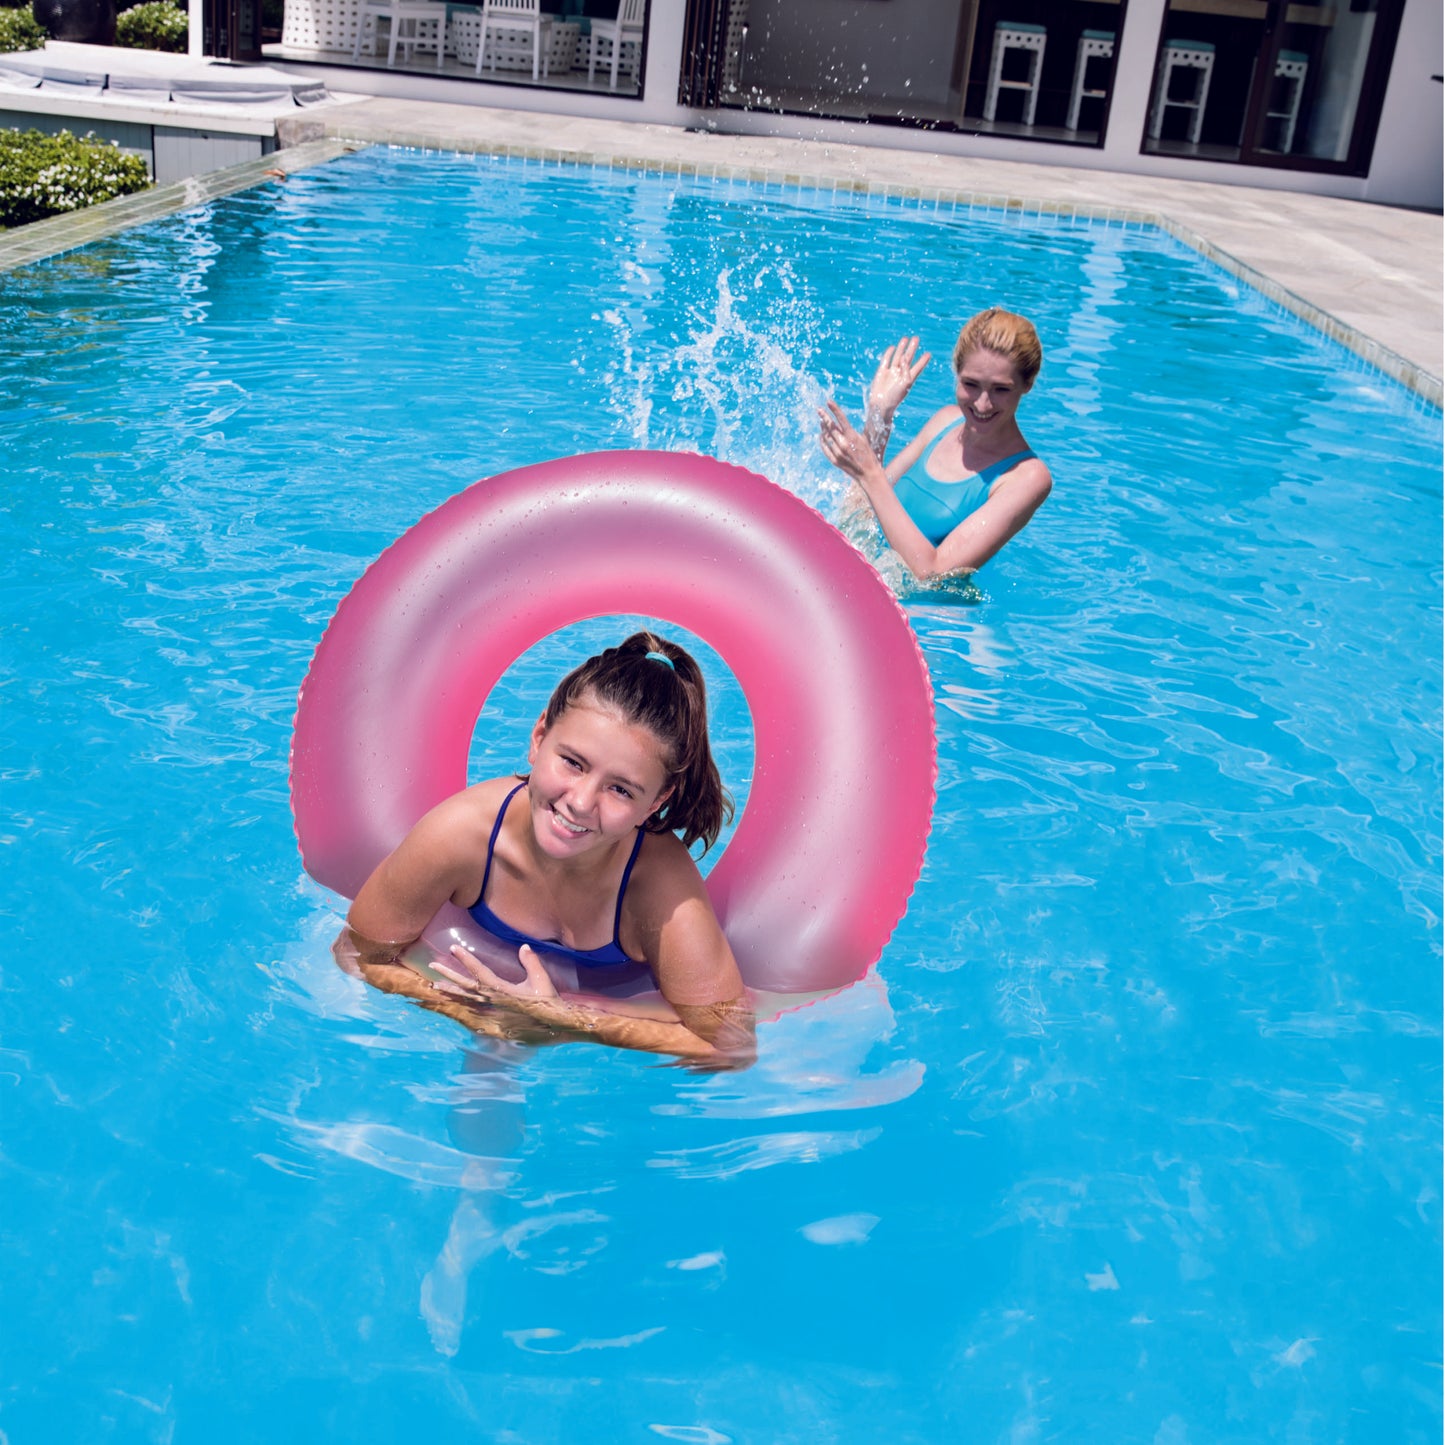 76cm Neon Swim Ring Inflatable Swim Rings Durable Tough Portable Lightweight Easy Inflate - Homeware Discounts